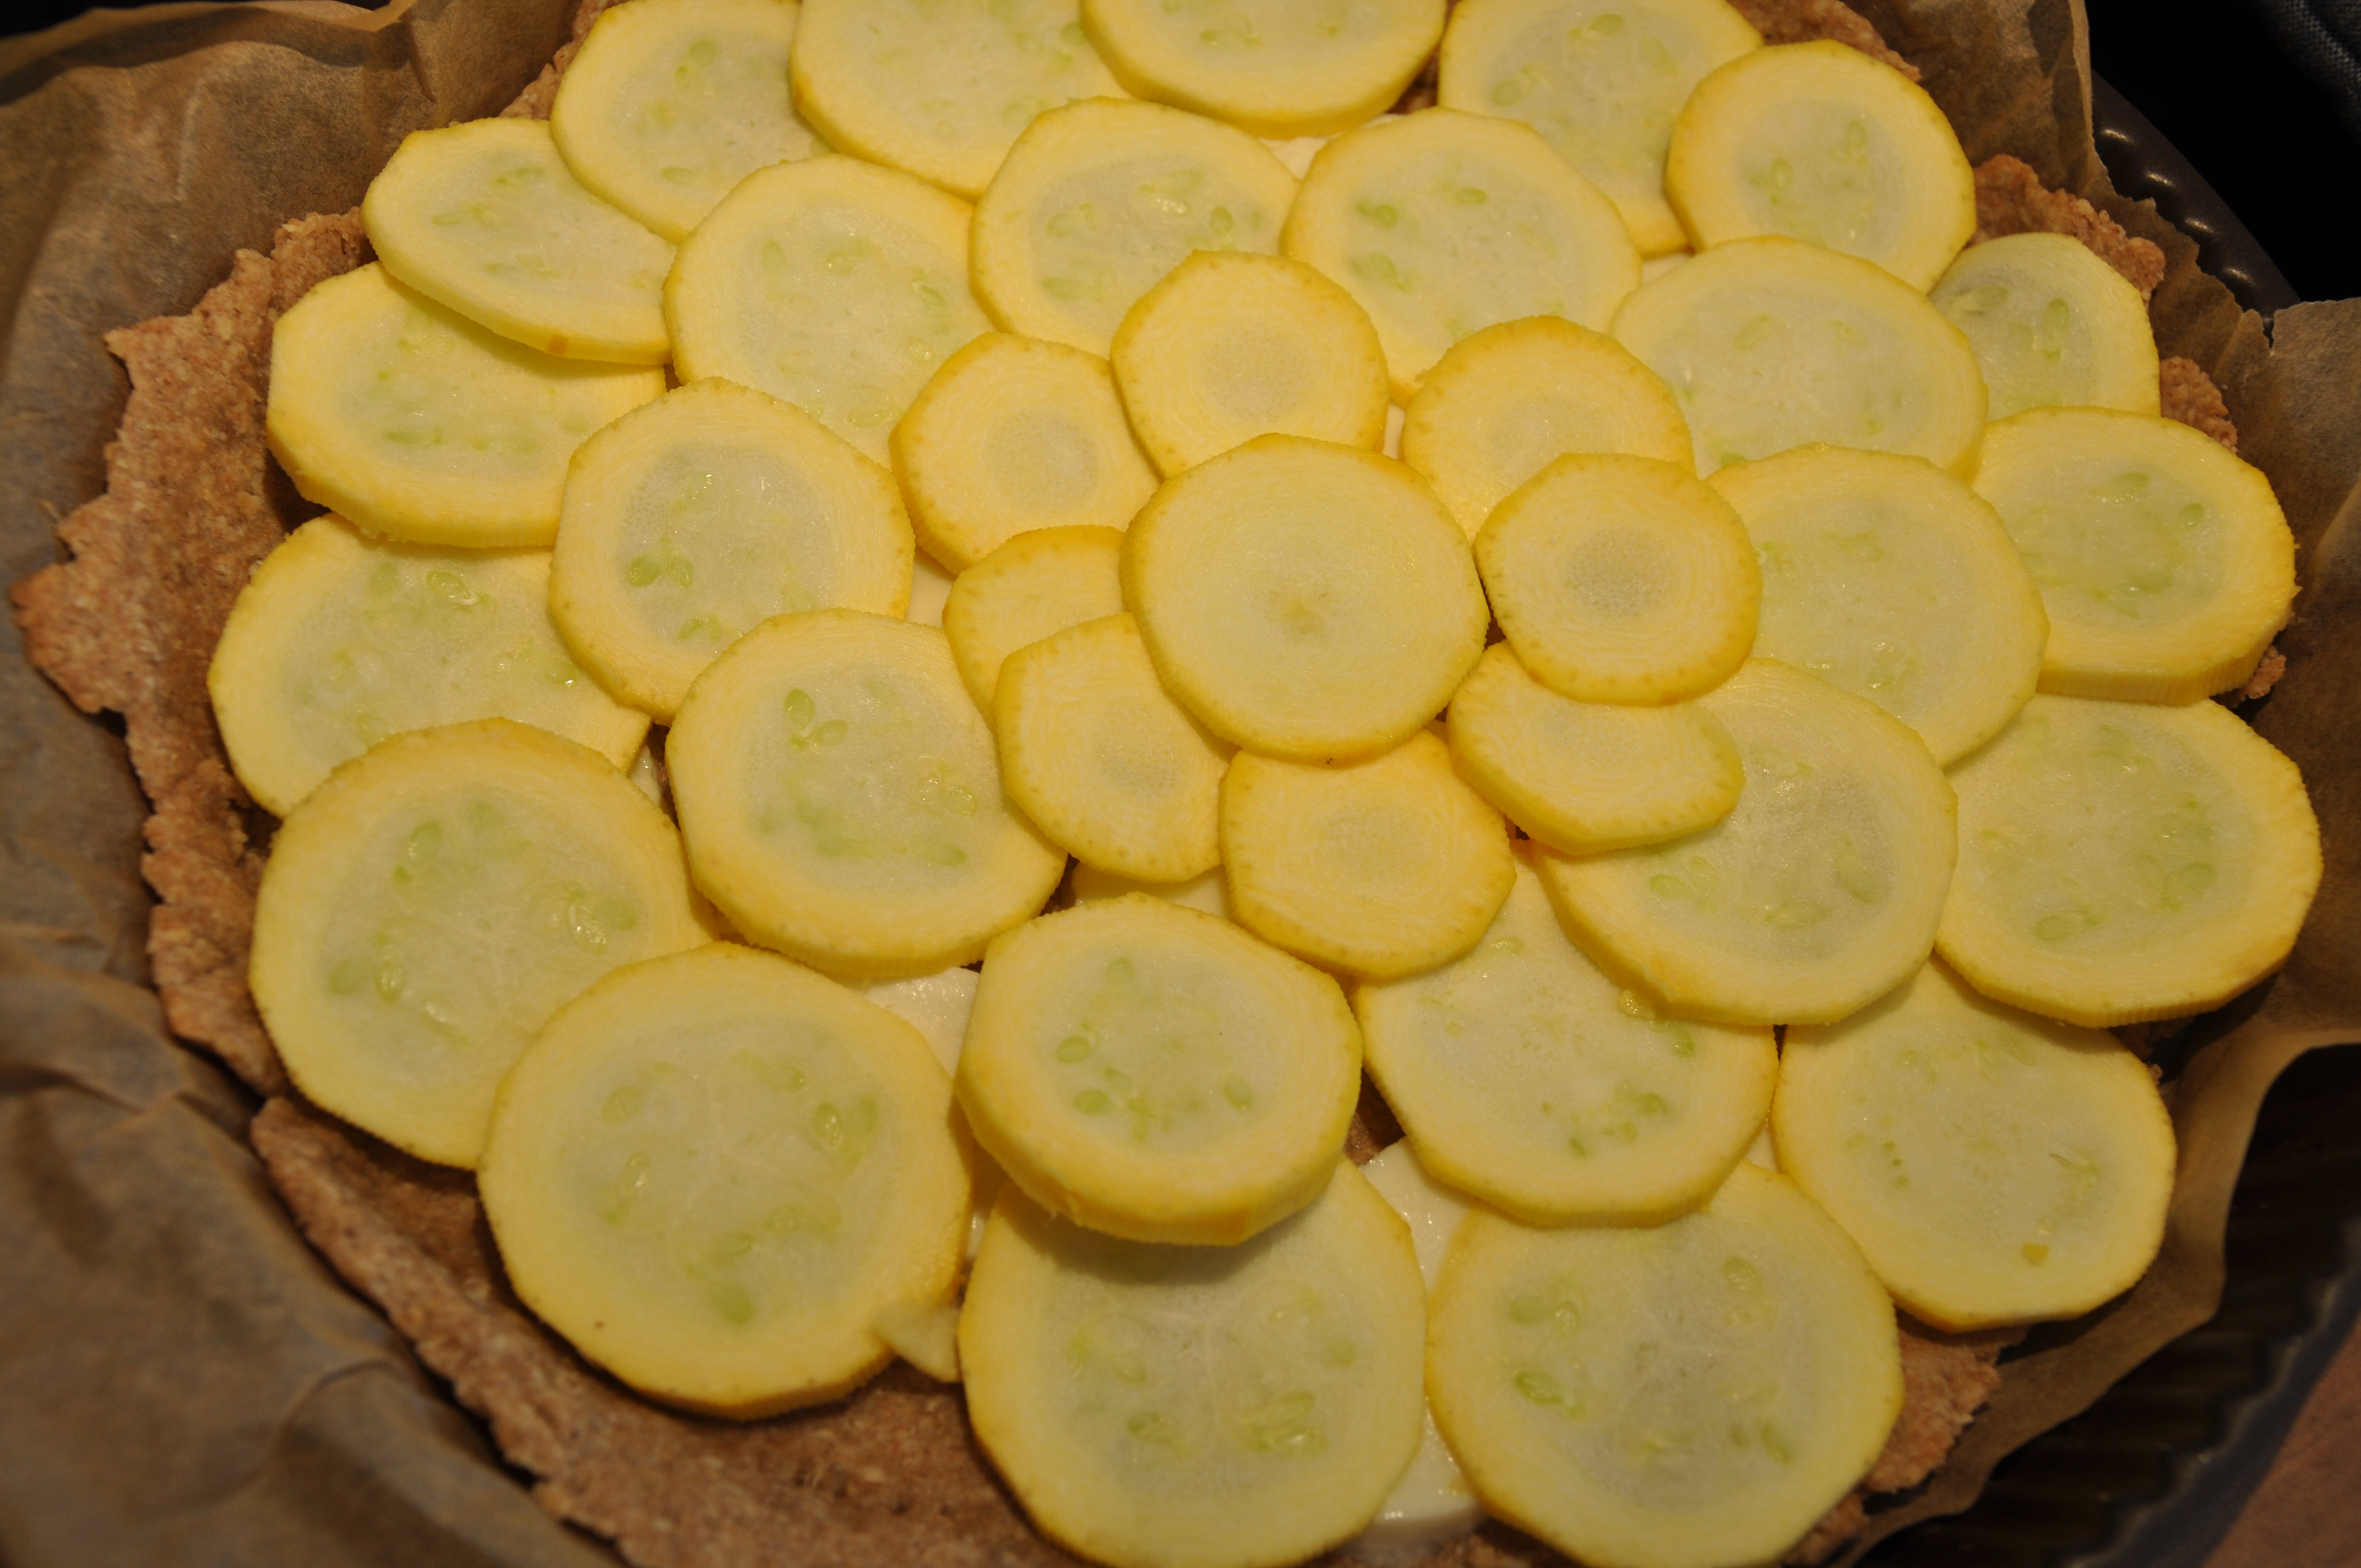 Tarte courgettes